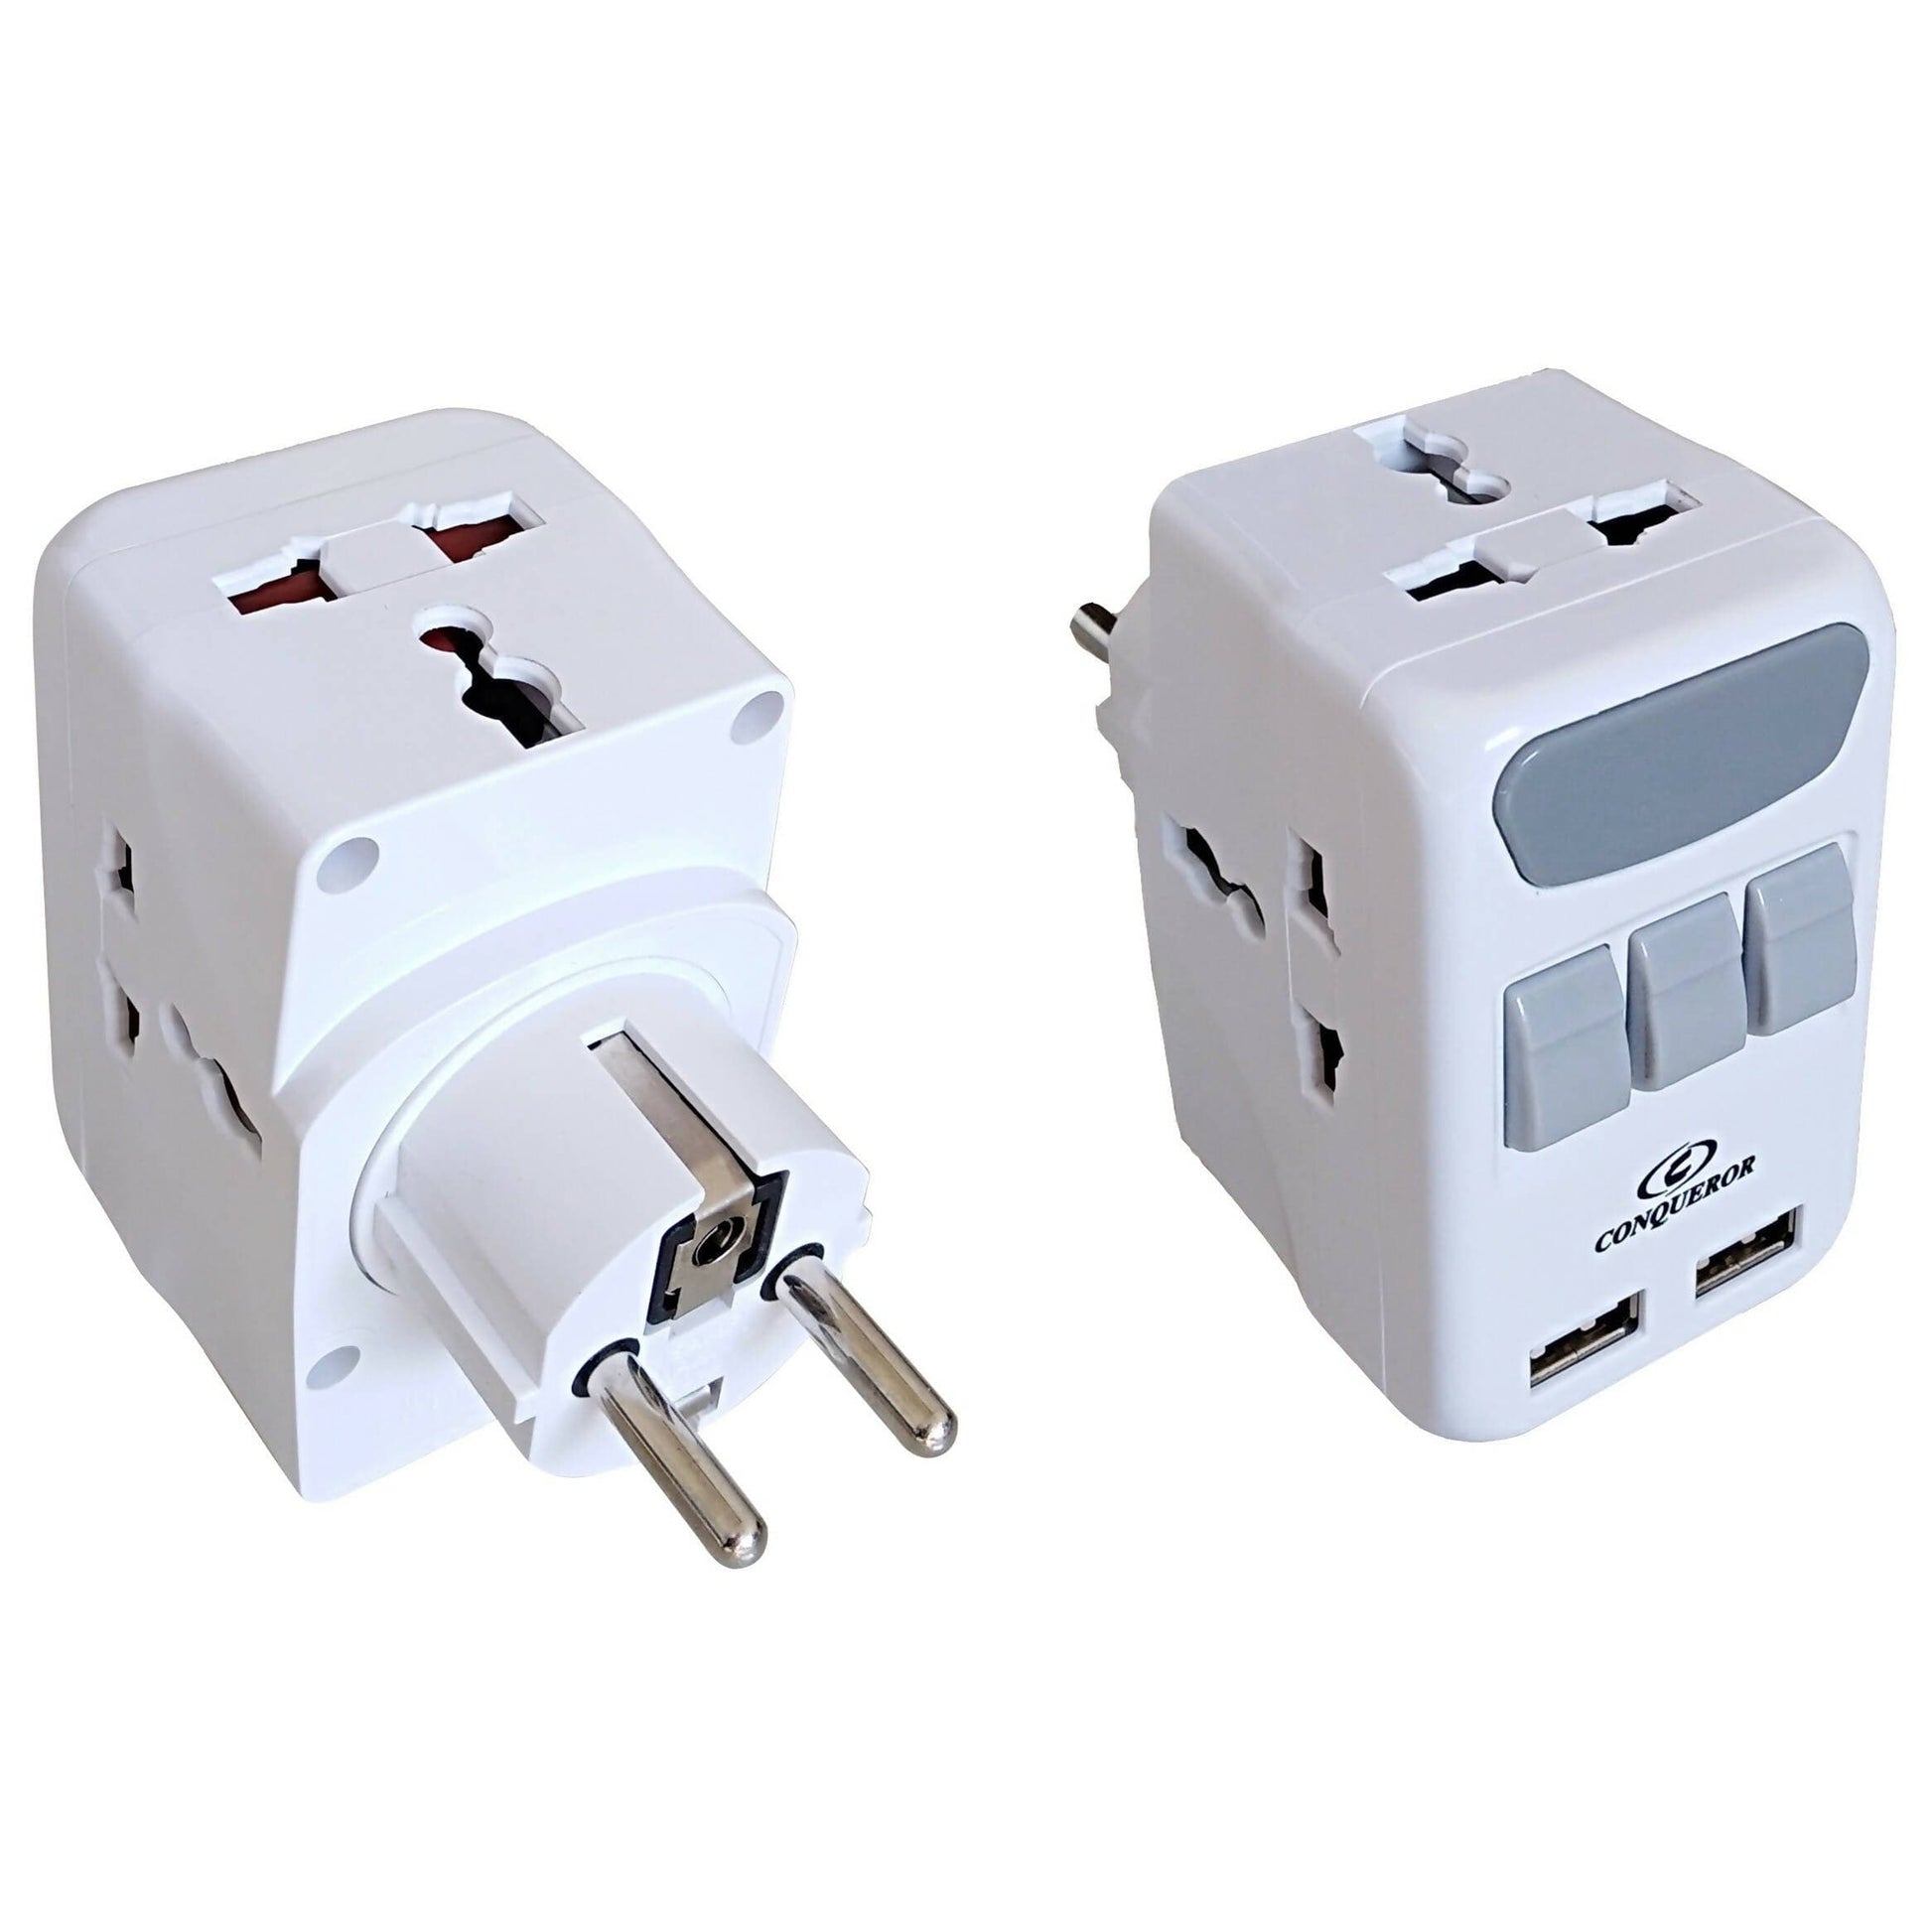 Provideolb Electrical Multi-Outlets Conqueror 3 Plug 2 USB Adapter Wall Tap Multiple Charging Station Overvoltage Protection - G156B